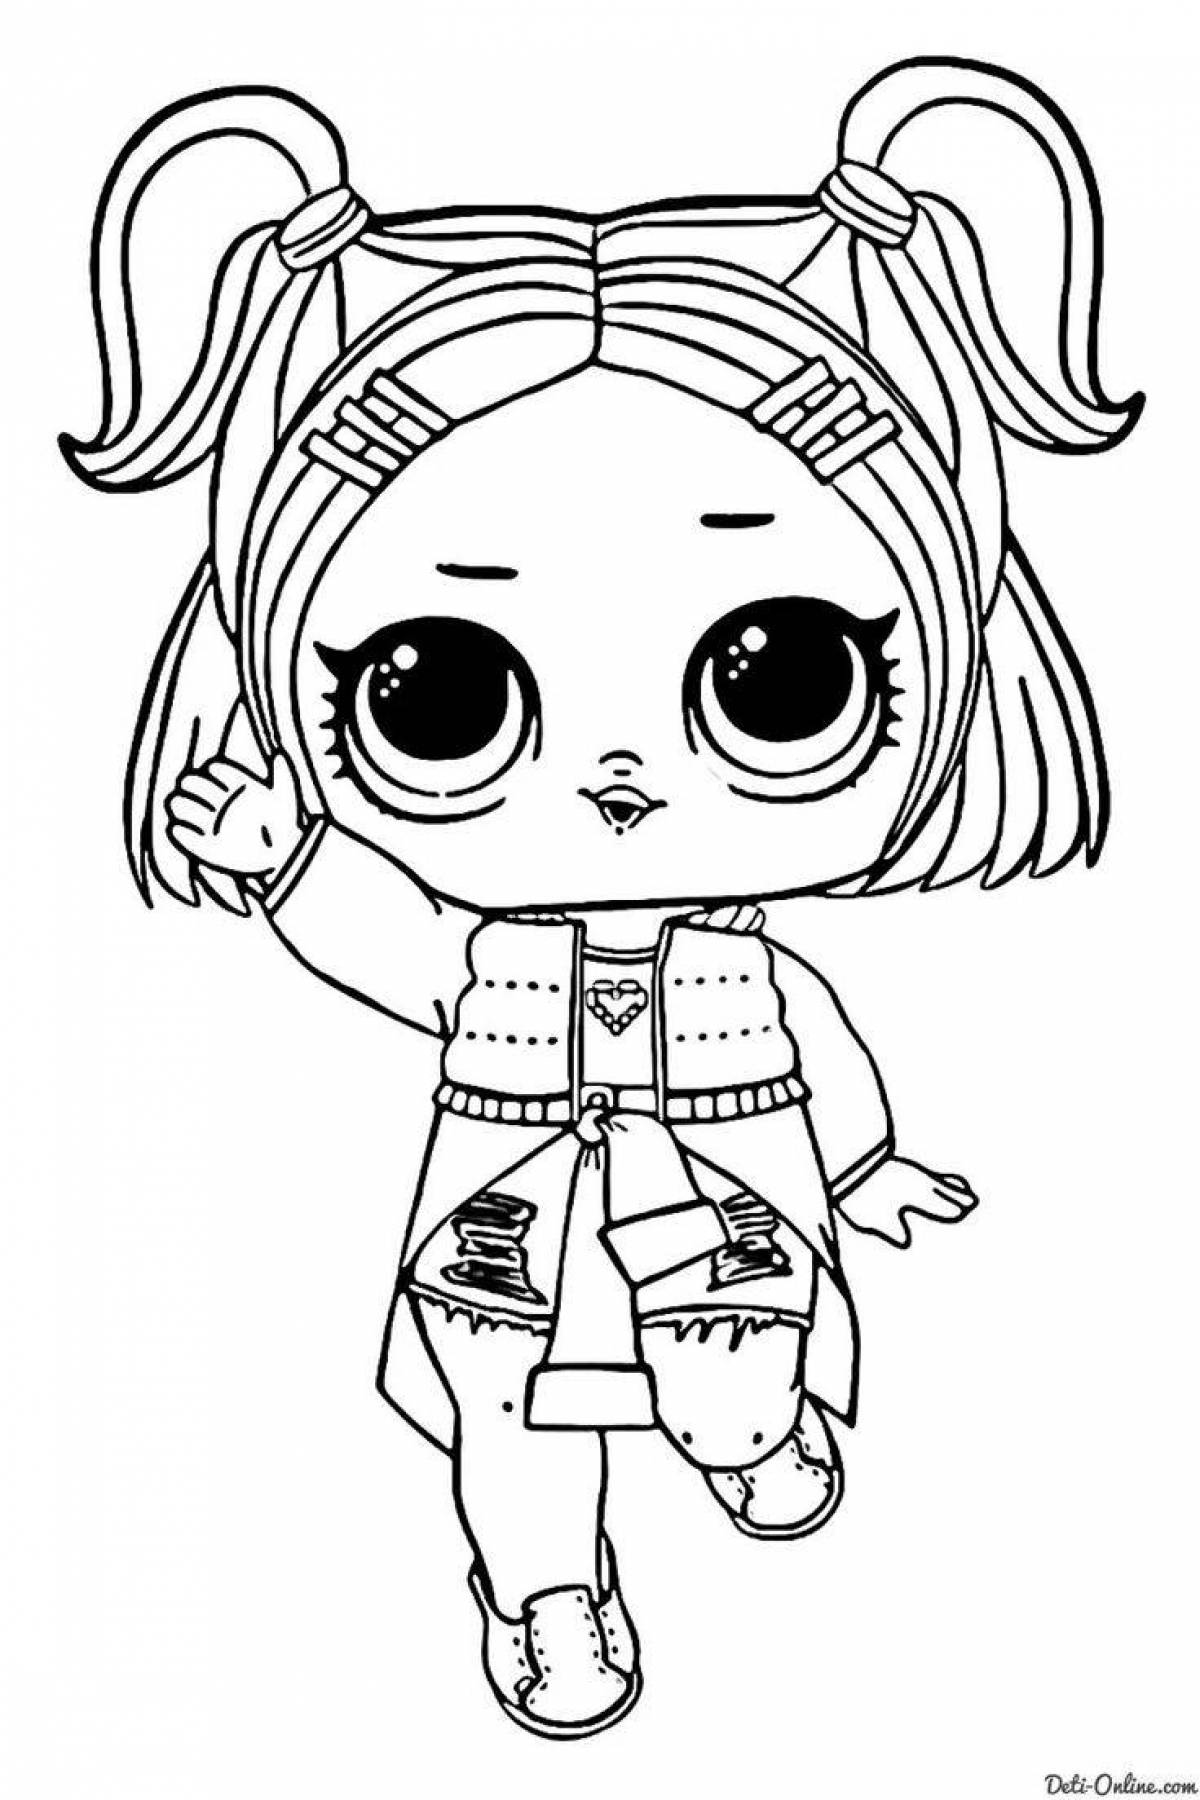 Colorful lol doll coloring book